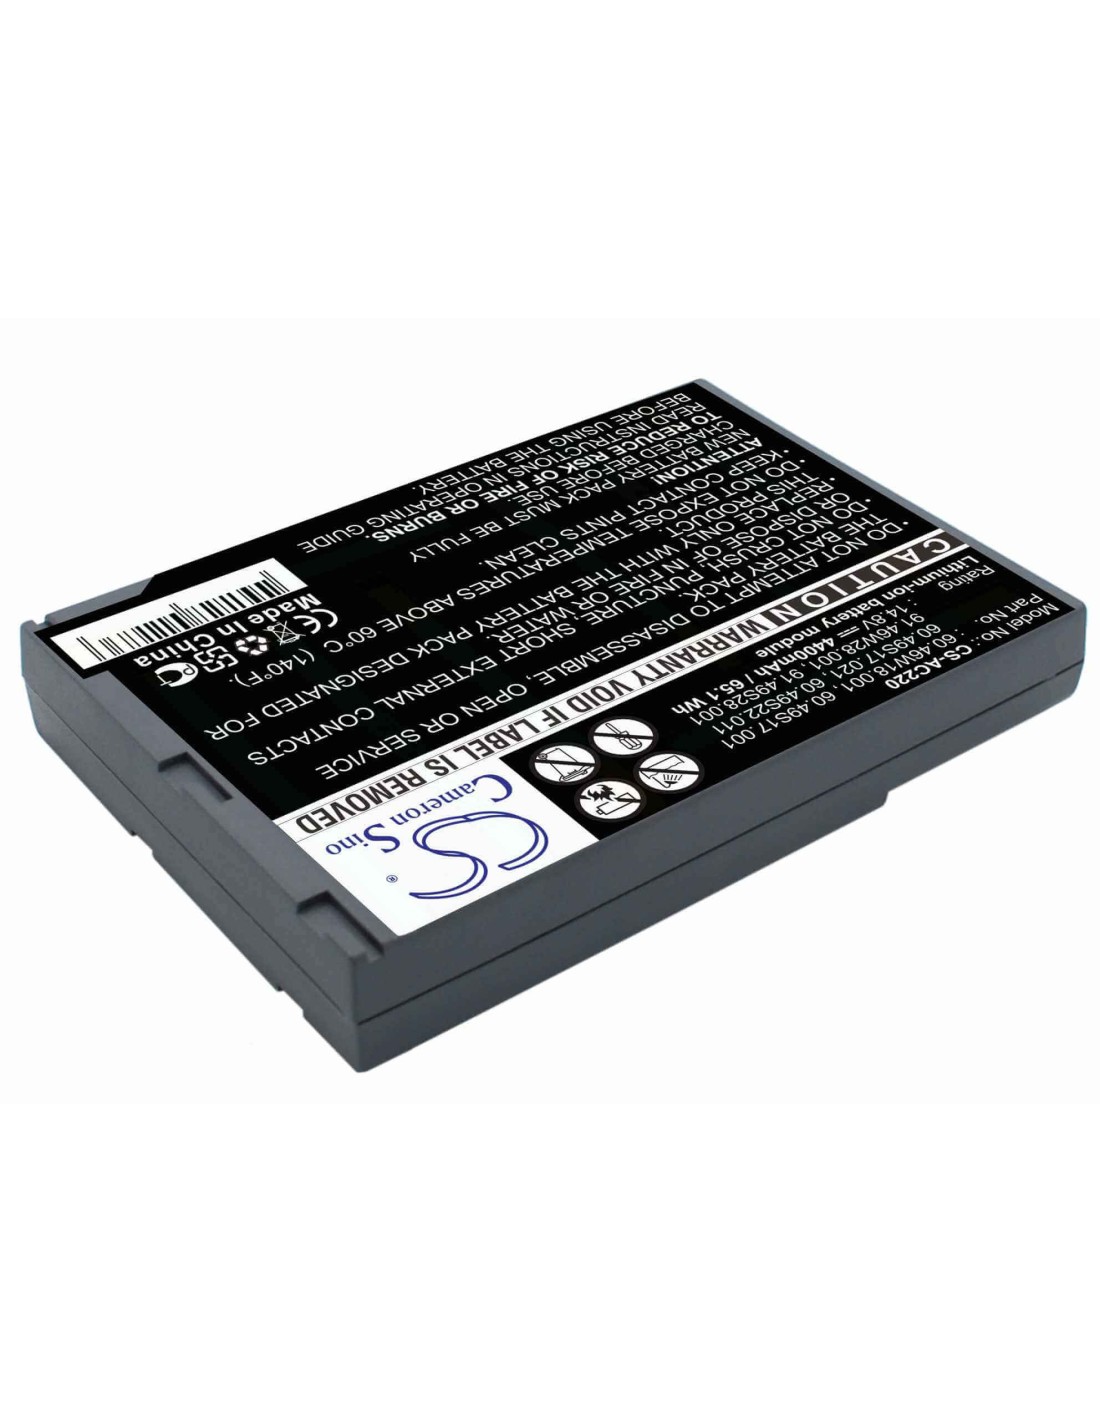 Grey Battery for Acer Travelmate 220, Travelmate 222, Travelmate 234 14.8V, 4400mAh - 65.12Wh